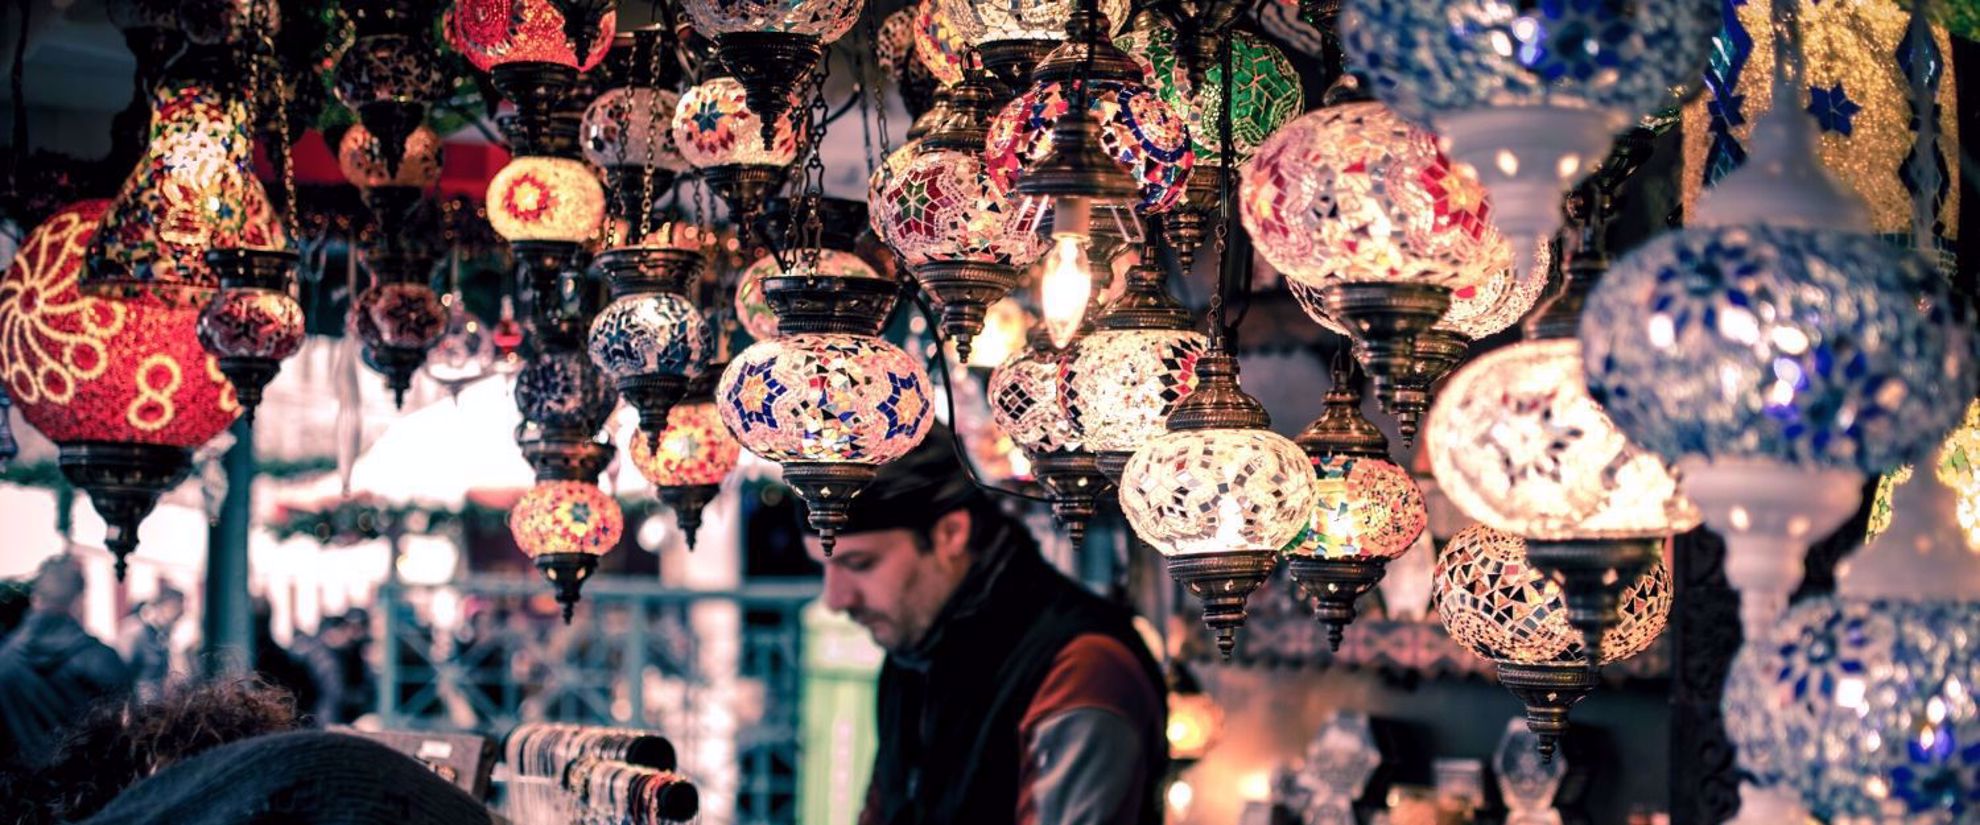 Glass lamps hanging in stall in Istanbul Bizarre, merchant in background